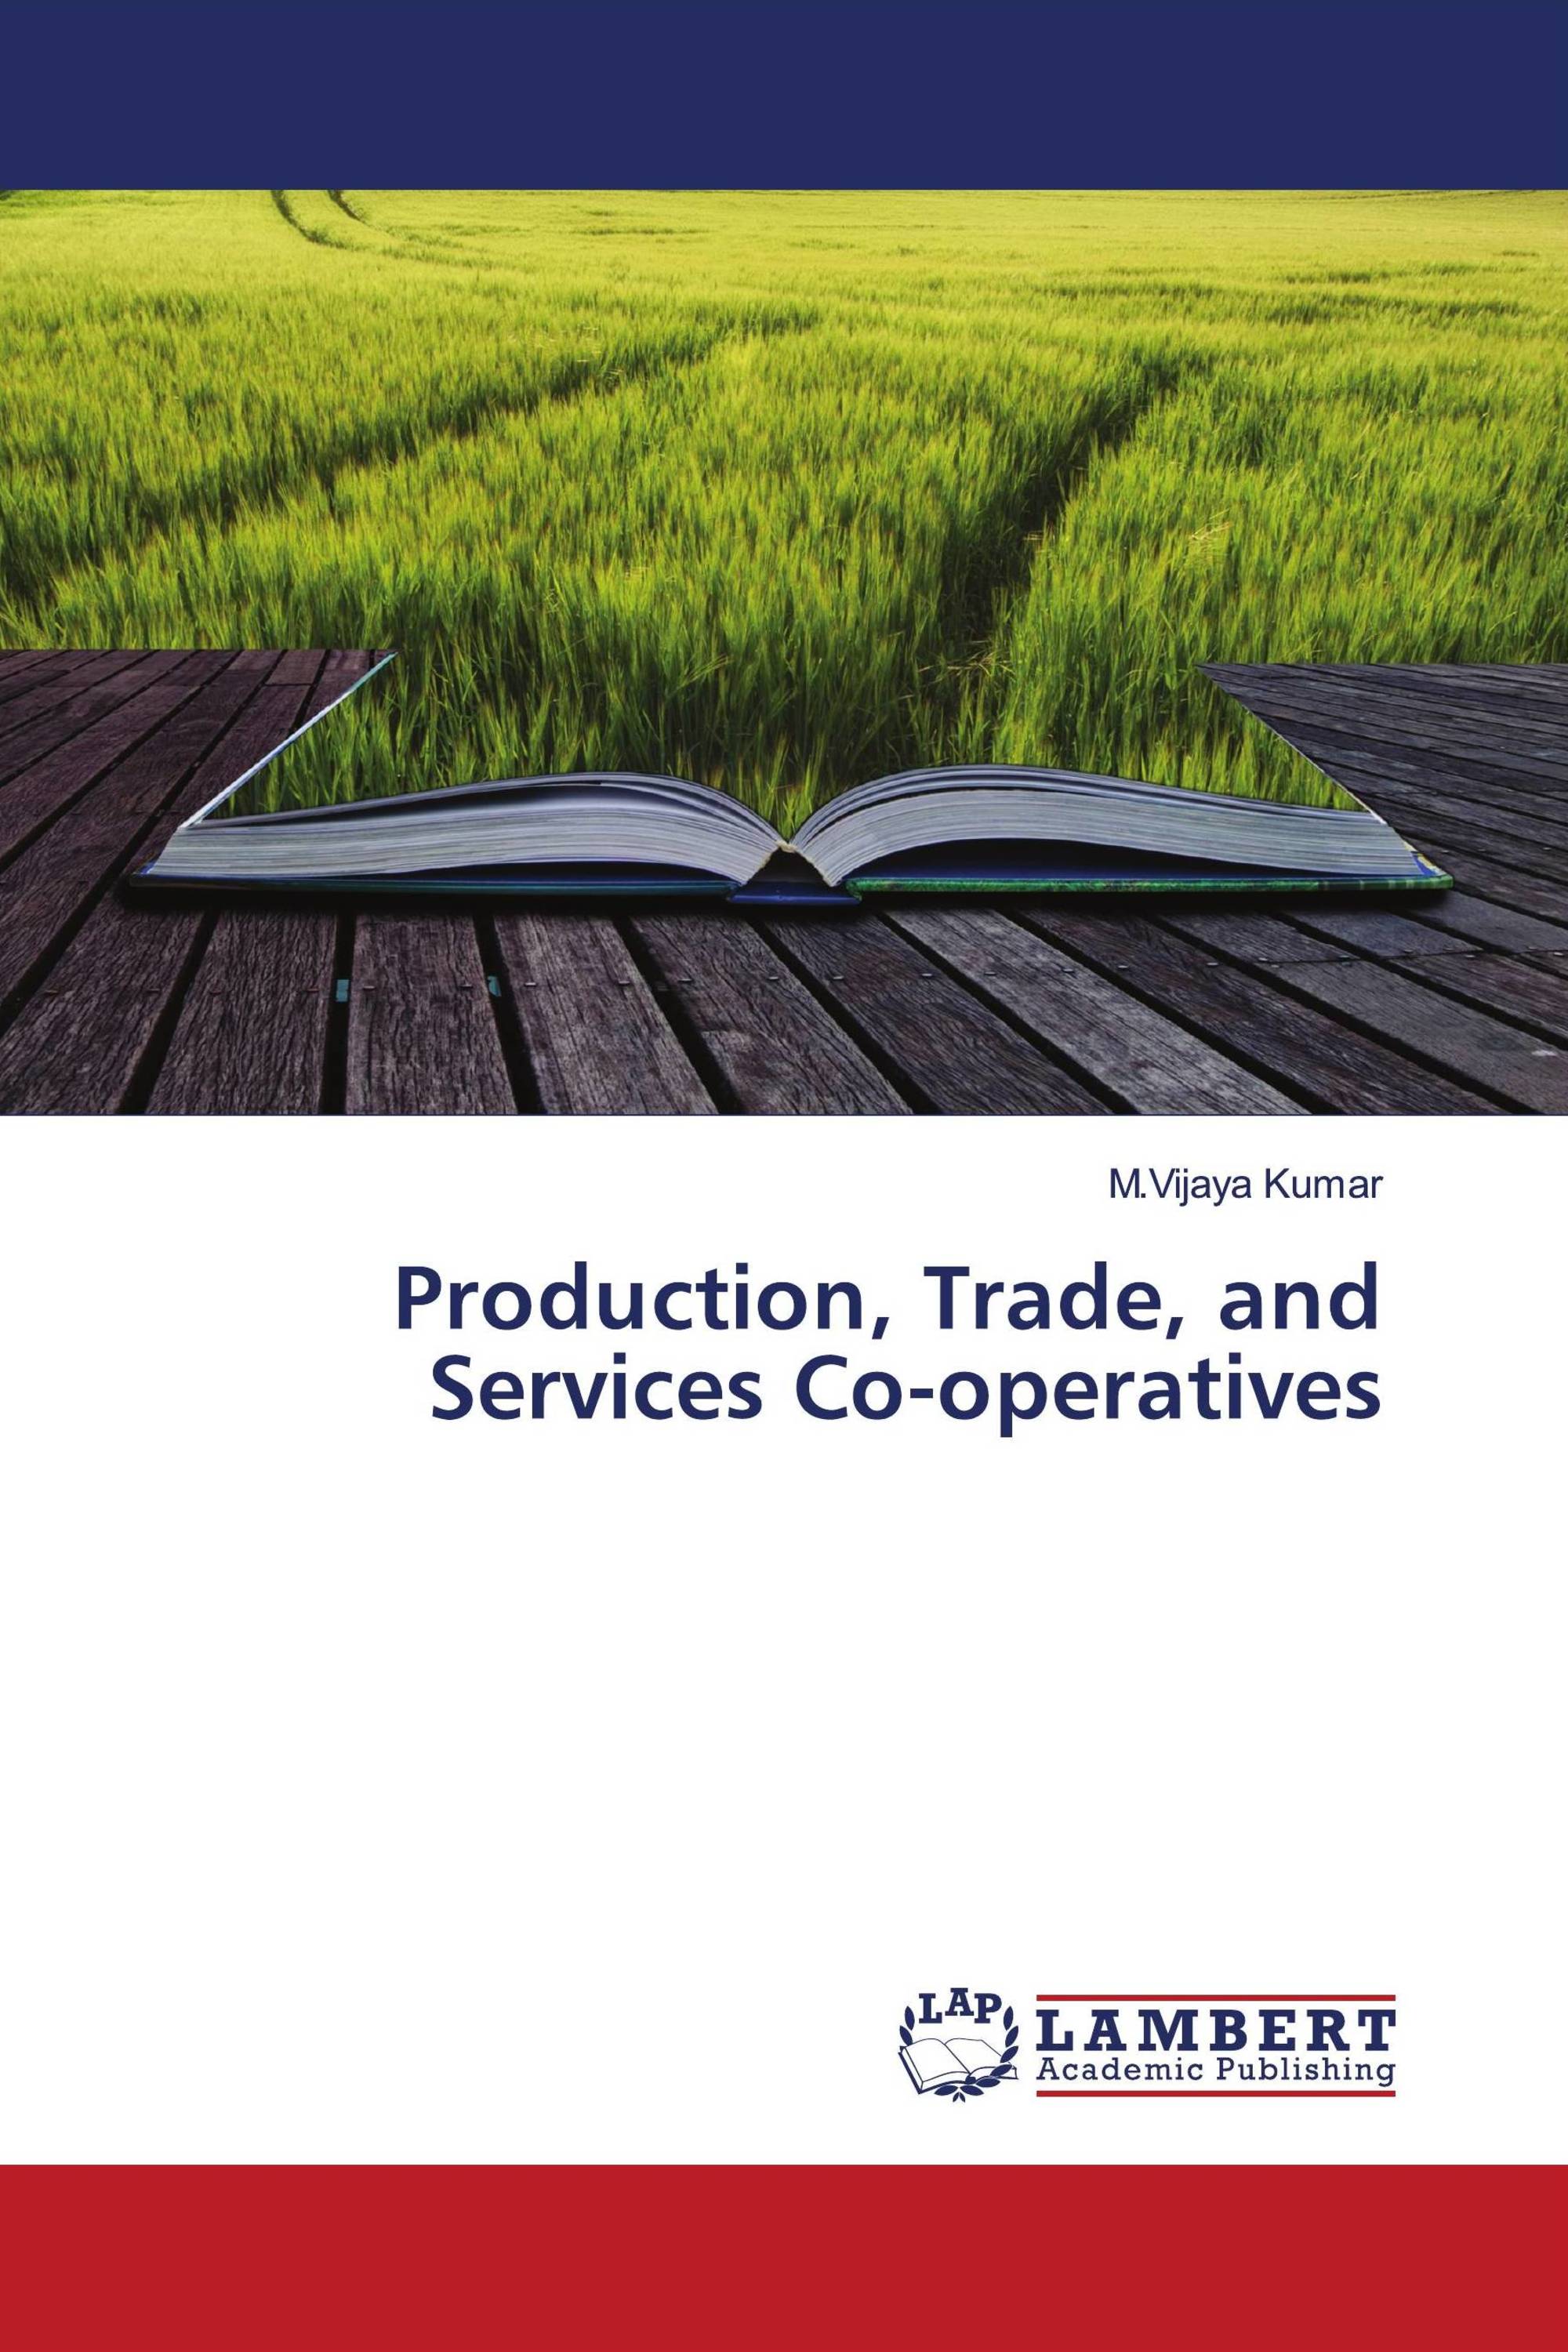 Production, Trade, and Services Co-operatives